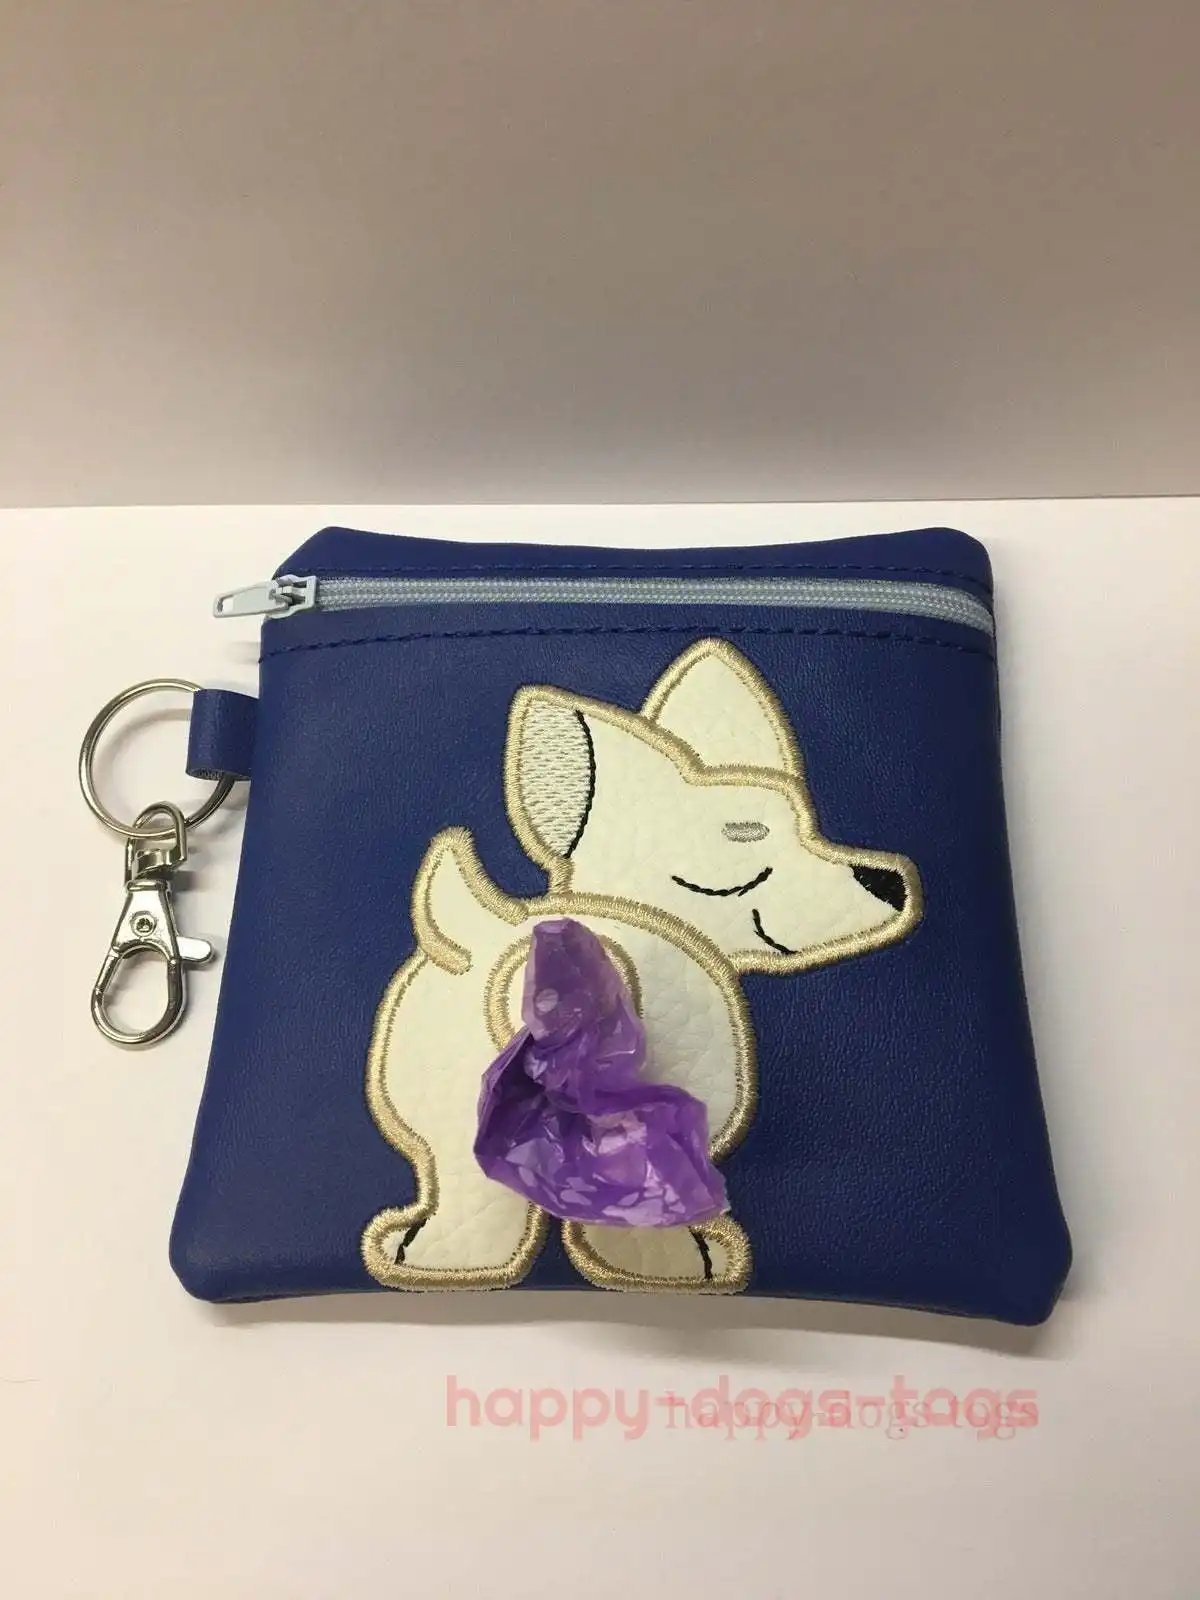 Embroidered Dog poo bag dispenser fawn Chihuahua on a blue bag